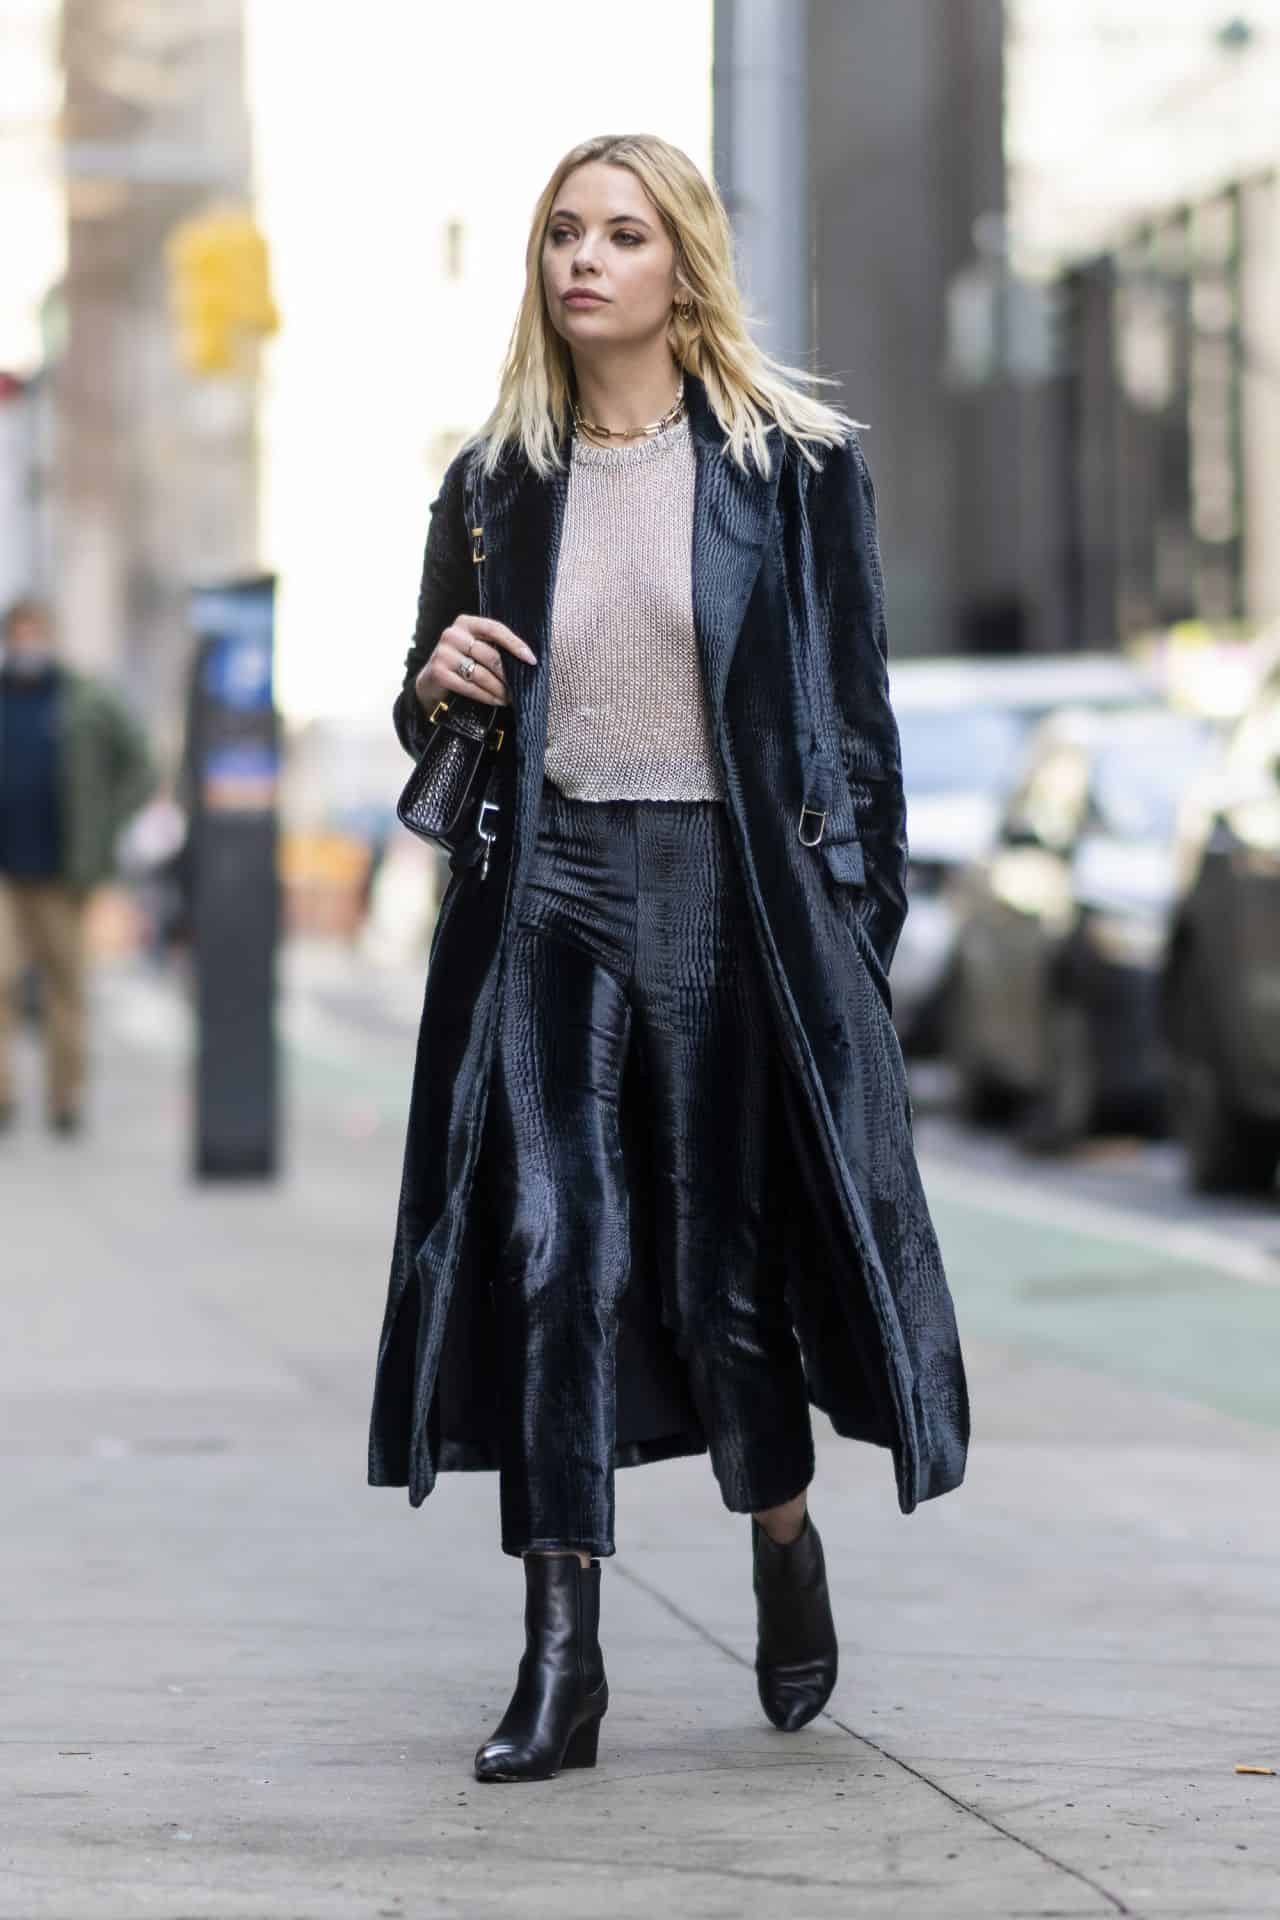 Ashley Benson Looks Chic as She Heads to a Business Meeting in New York City